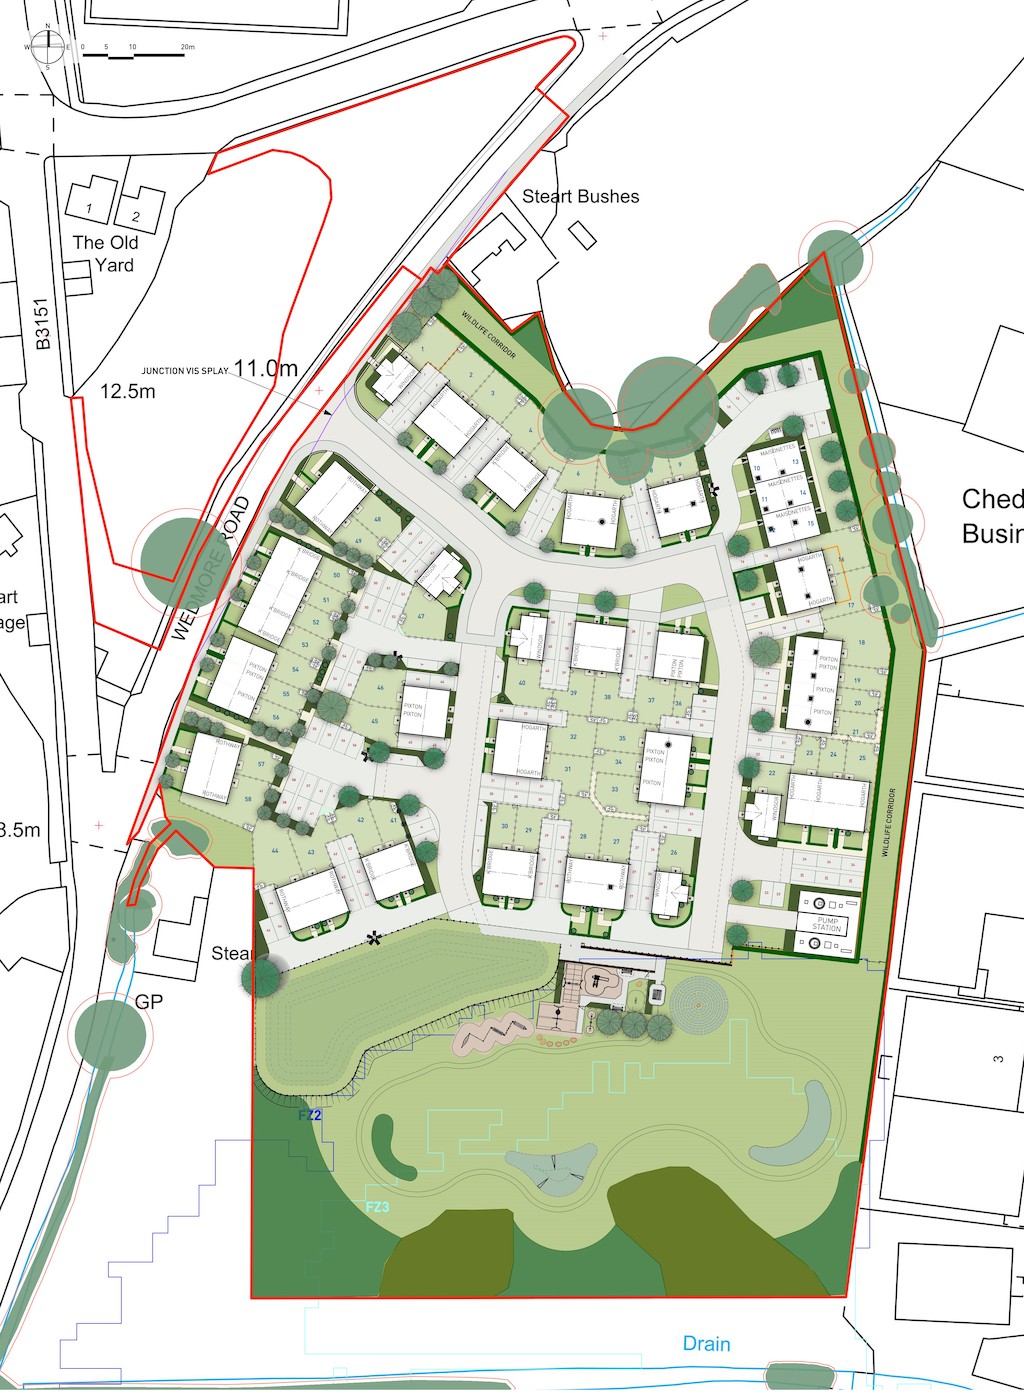 Keepmoat Homes announces purchase of land in Cheddar